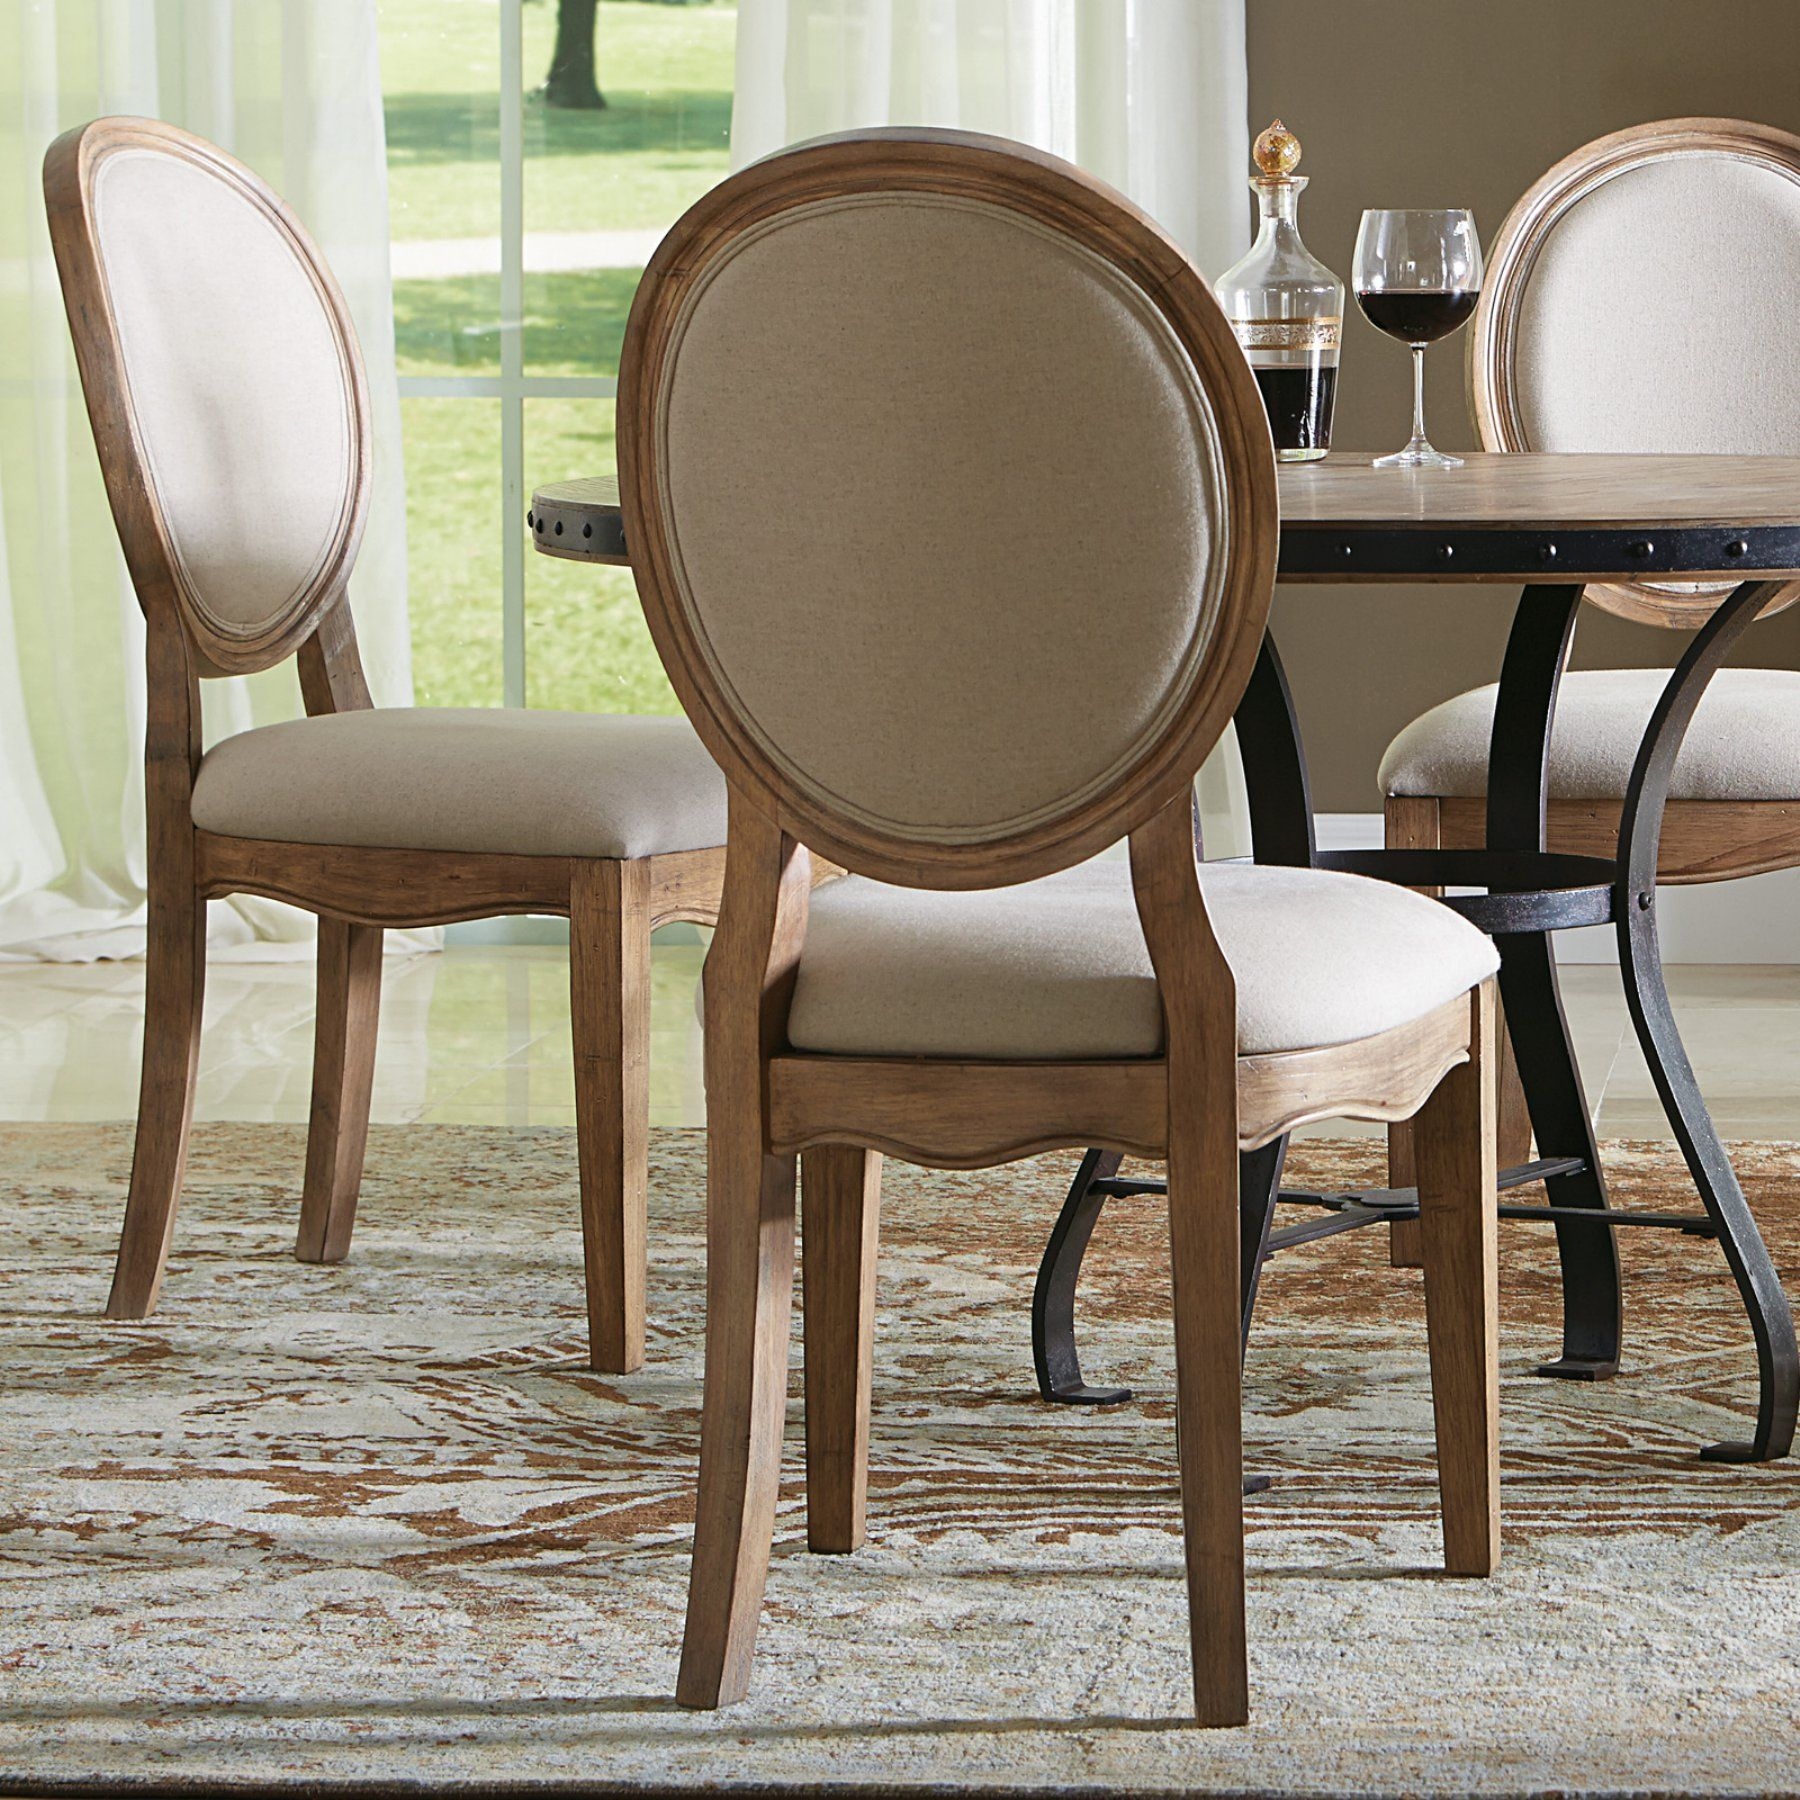 Round Back Dining Chairs Visualhunt, Round Back Dining Room Setup